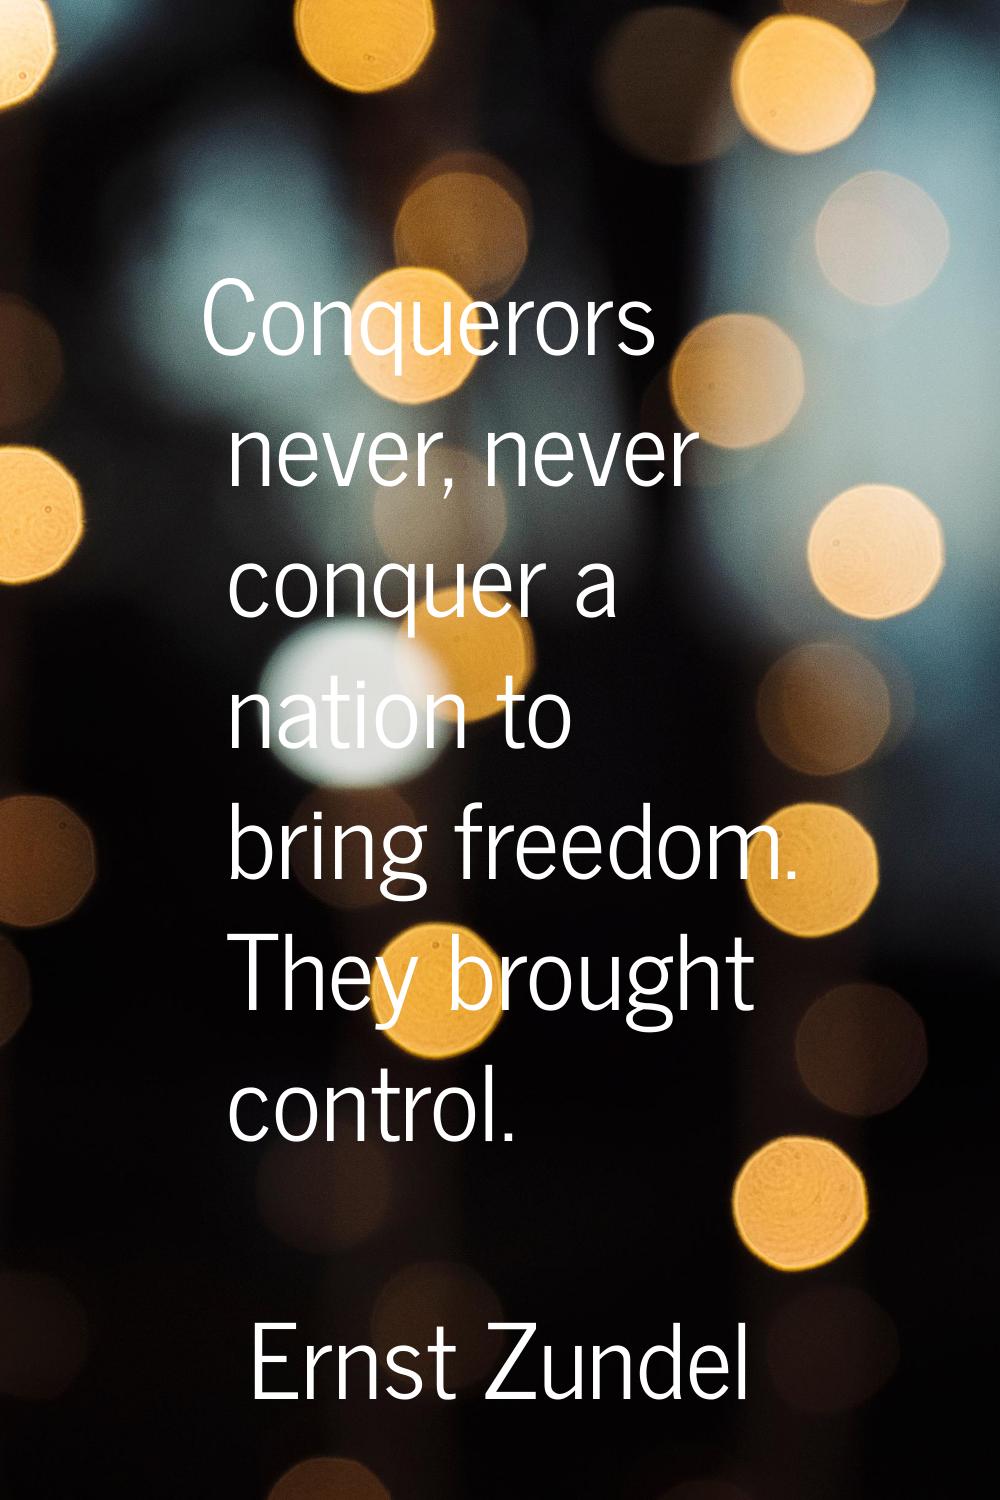 Conquerors never, never conquer a nation to bring freedom. They brought control.